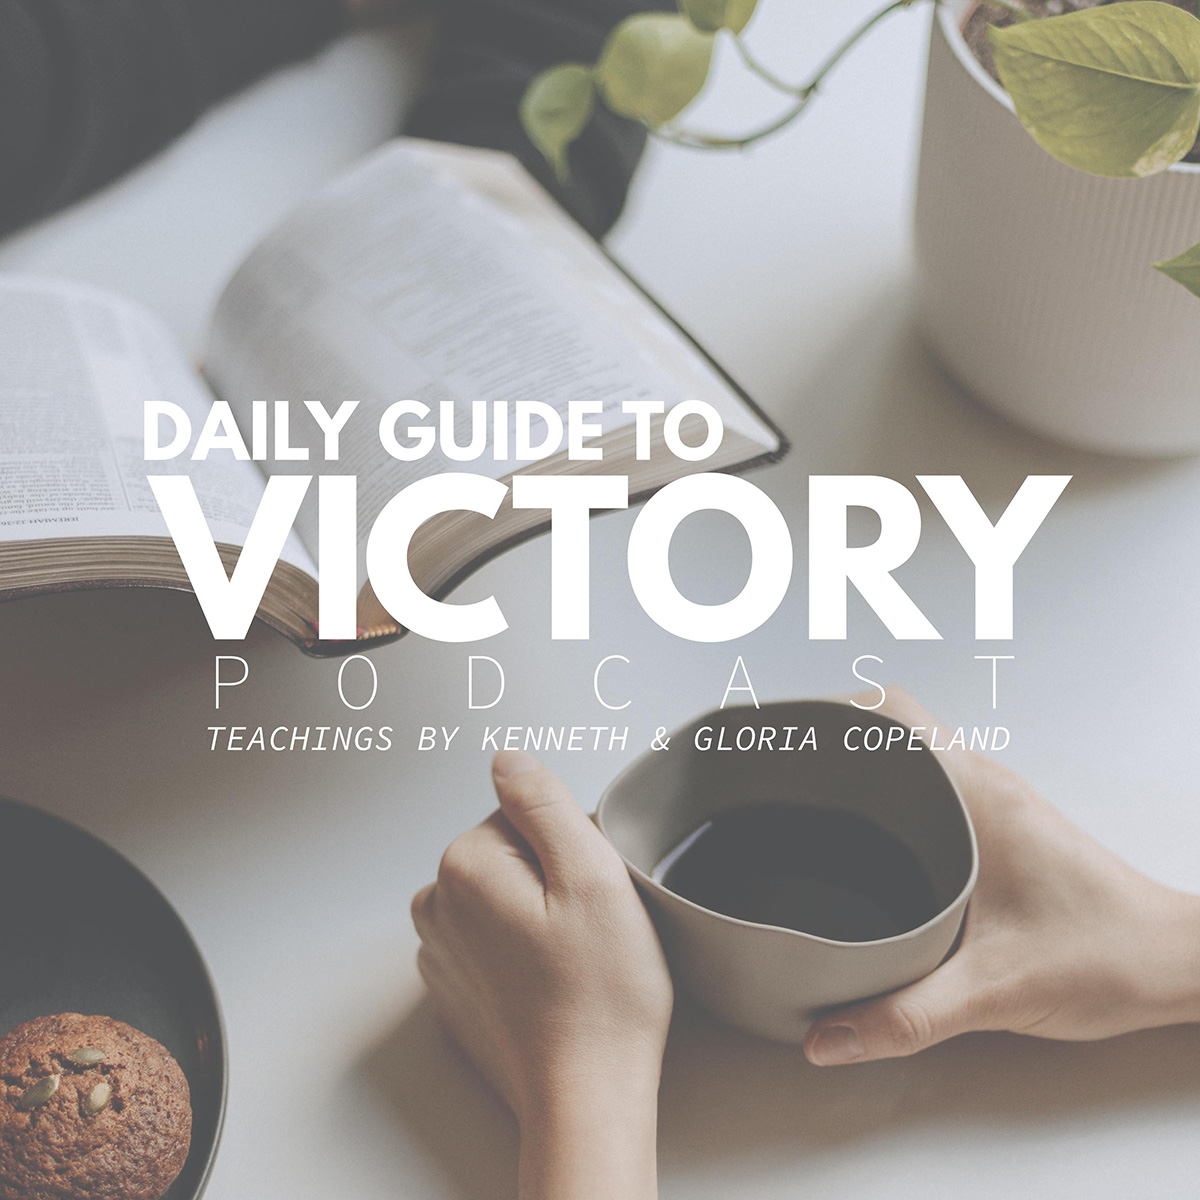 Daily Guide to Victory Podcast